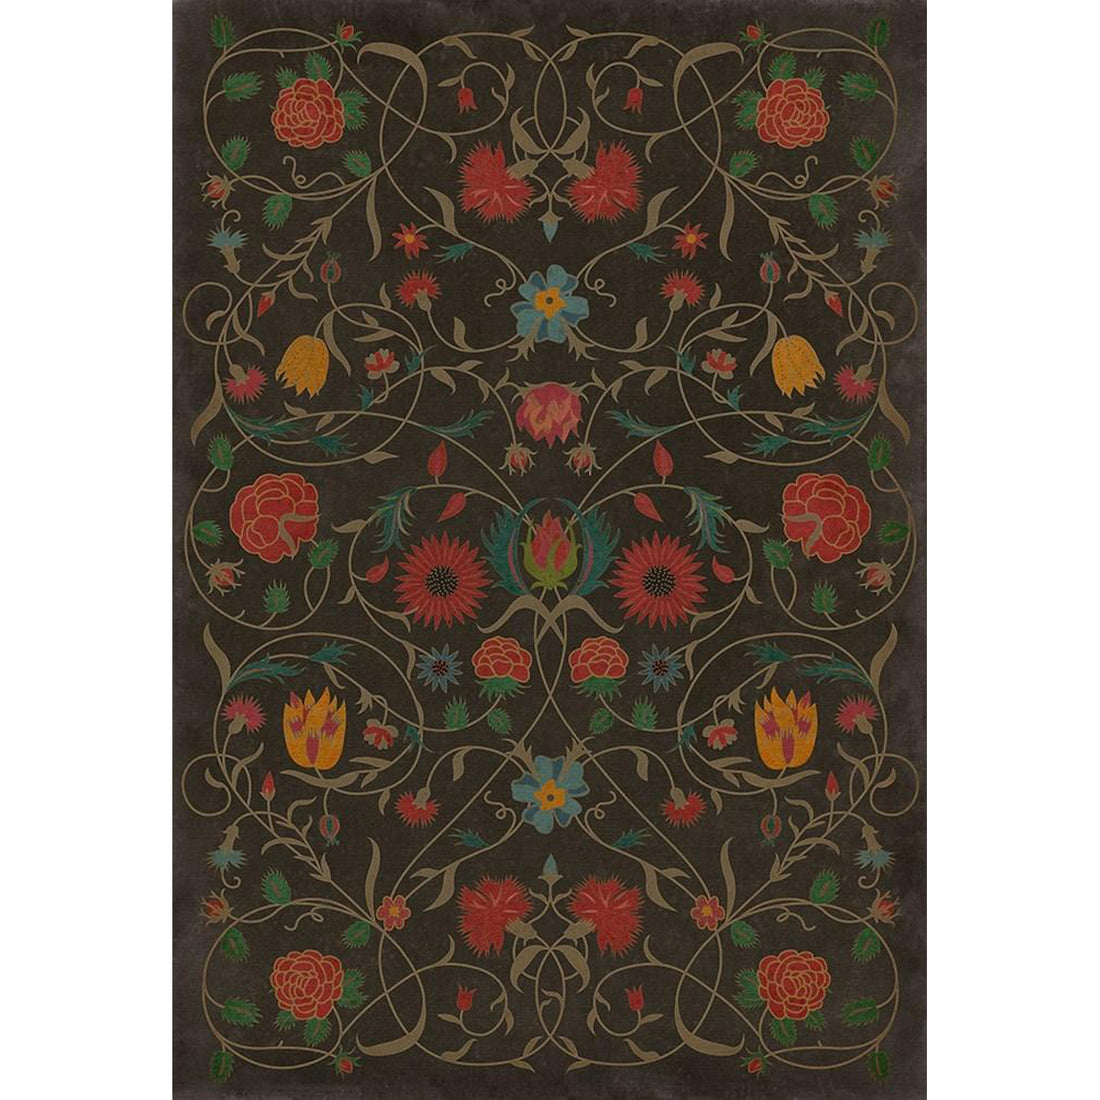 Ornate floral pattern with symmetrical design on a Williamsburg Floral Susannah Vinyl Rug by Spicher and Company.